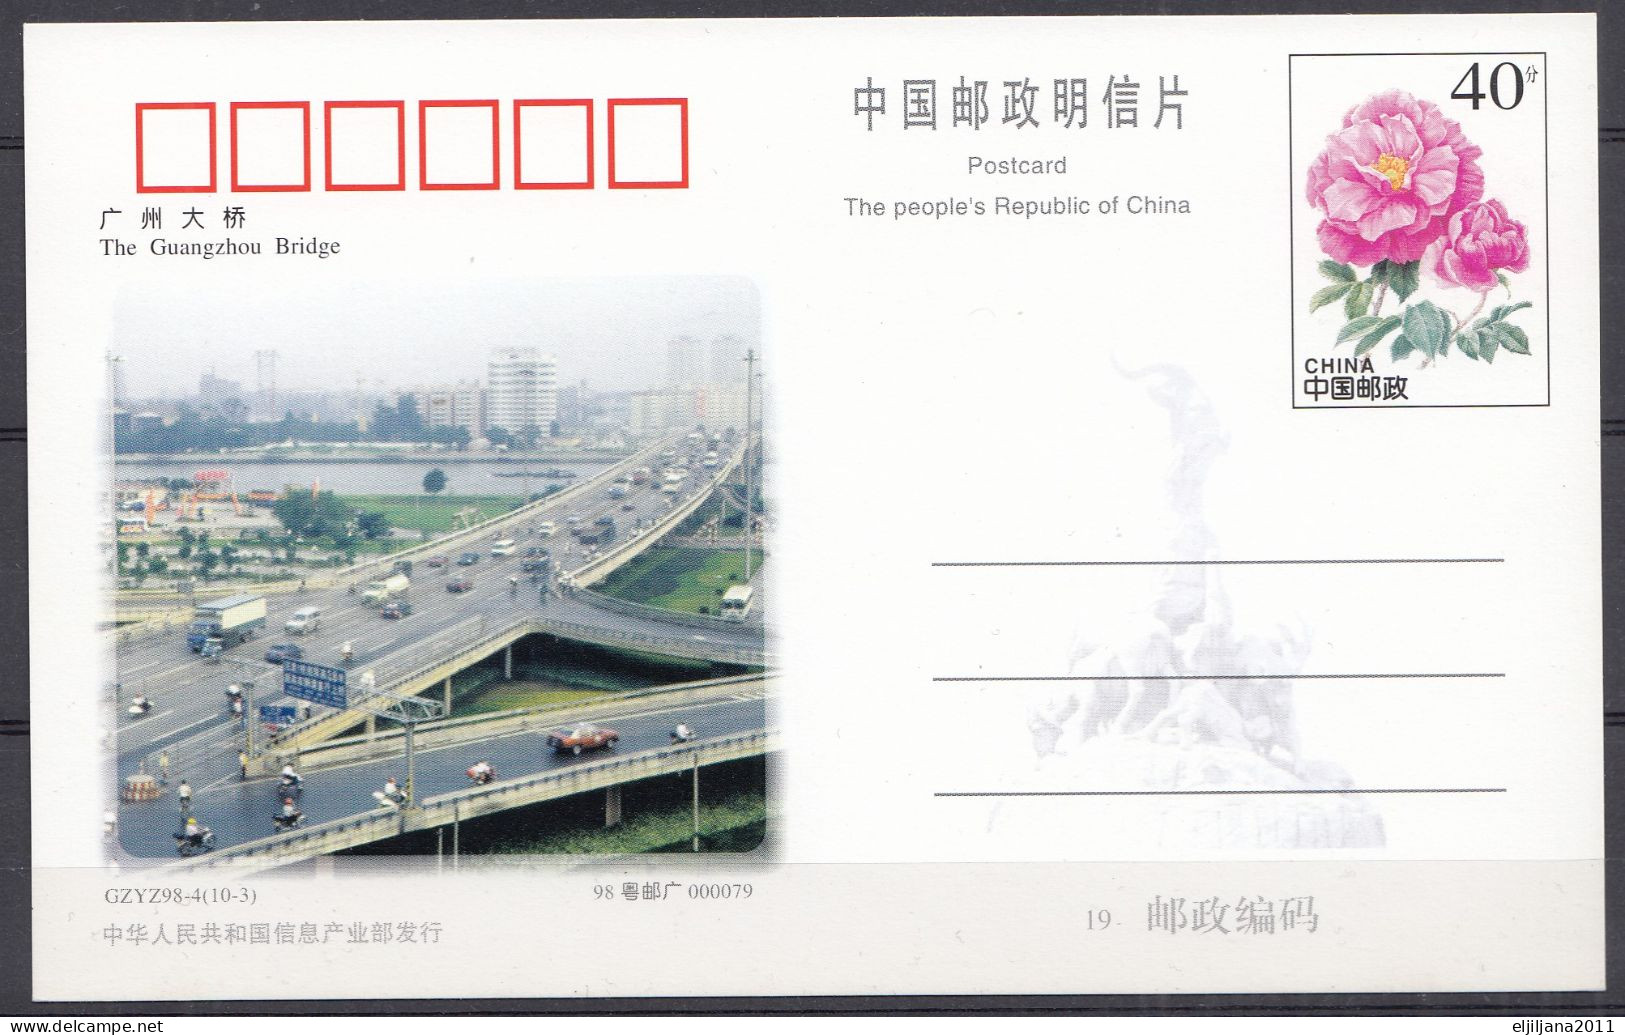 ⁕ CHINA 1998 ⁕ Bridges across the Pearl River ⁕ set of 8 stationery unused postcard ⁕ see all scan